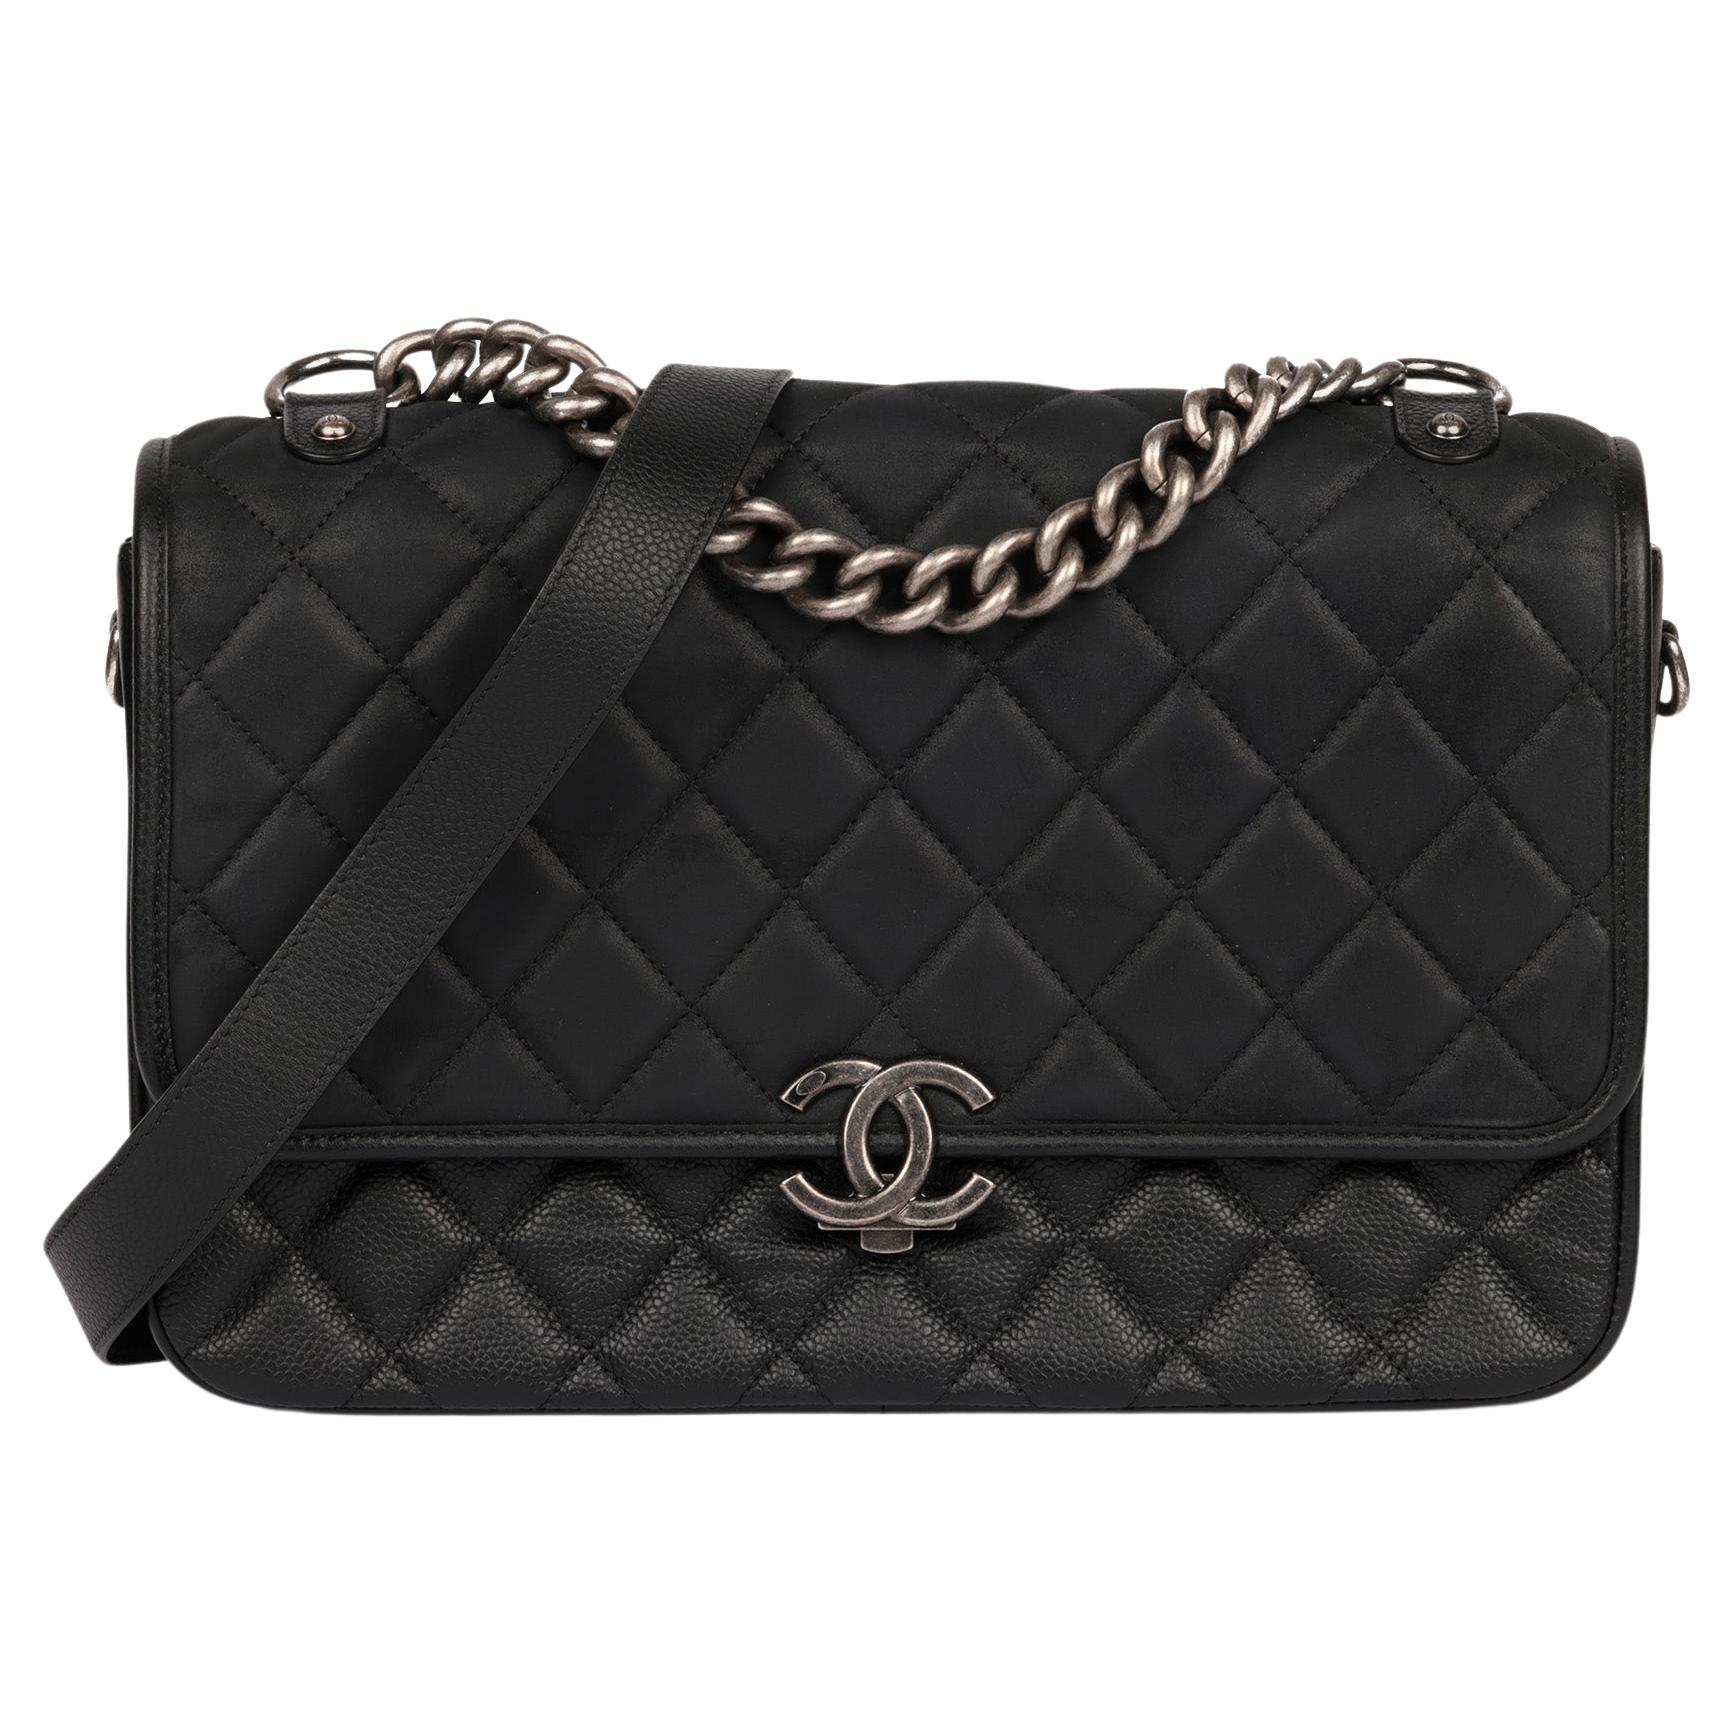 Chanel Black Quilted Caviar Leather & Iridescent Calfskin Daily Carry Messenger